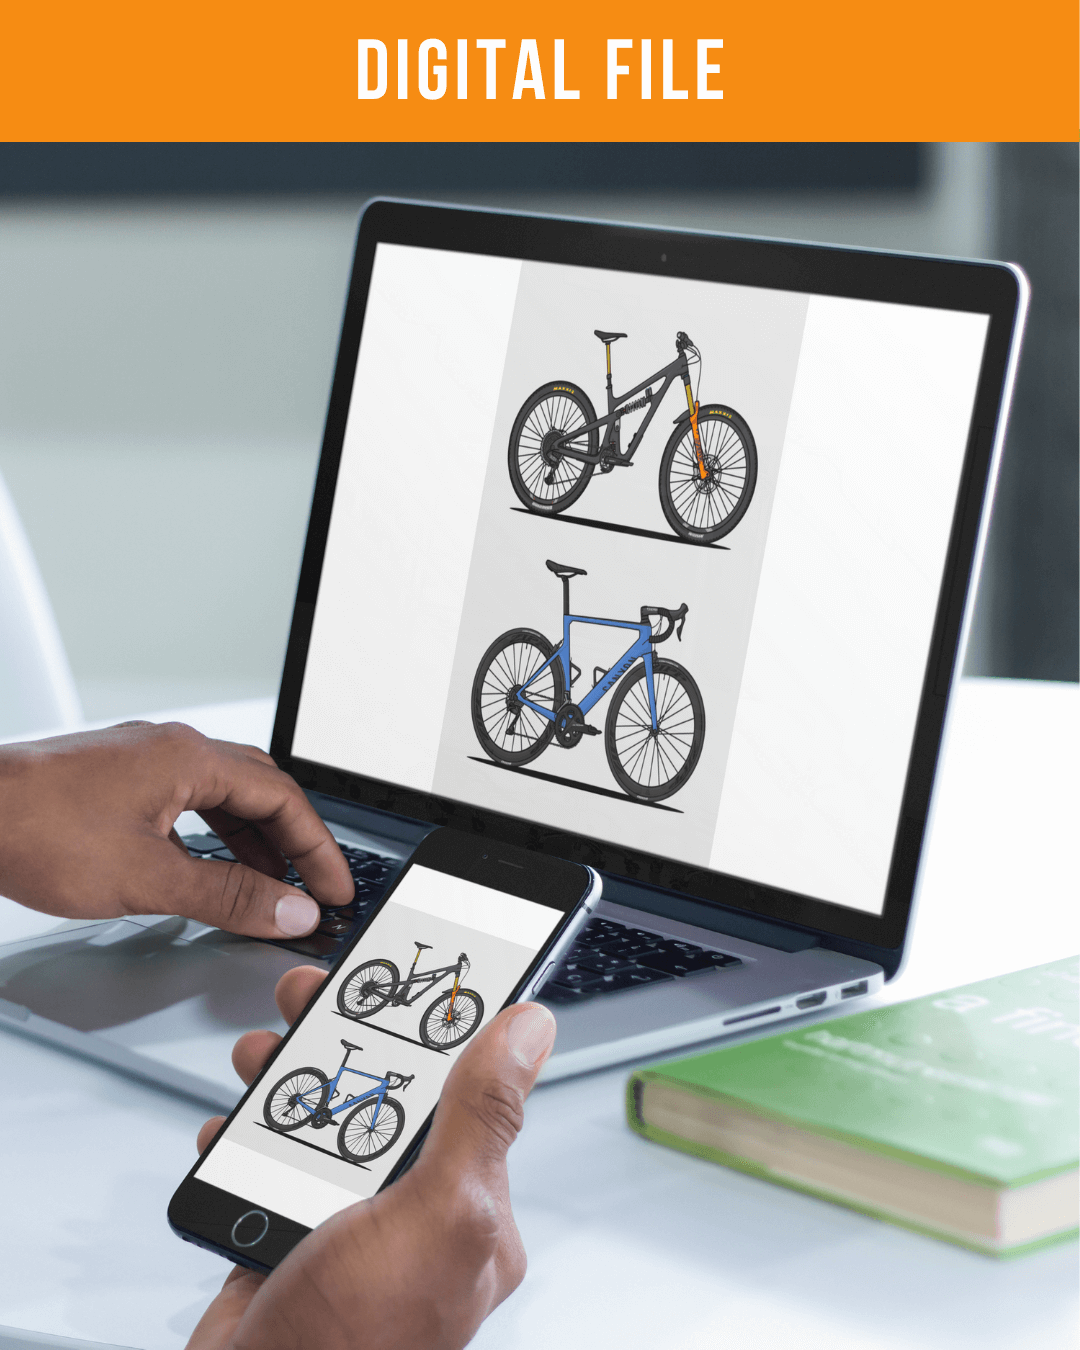 Personalized Bicycle artwork Digital Files 2 bikes by Stand Out Bikes